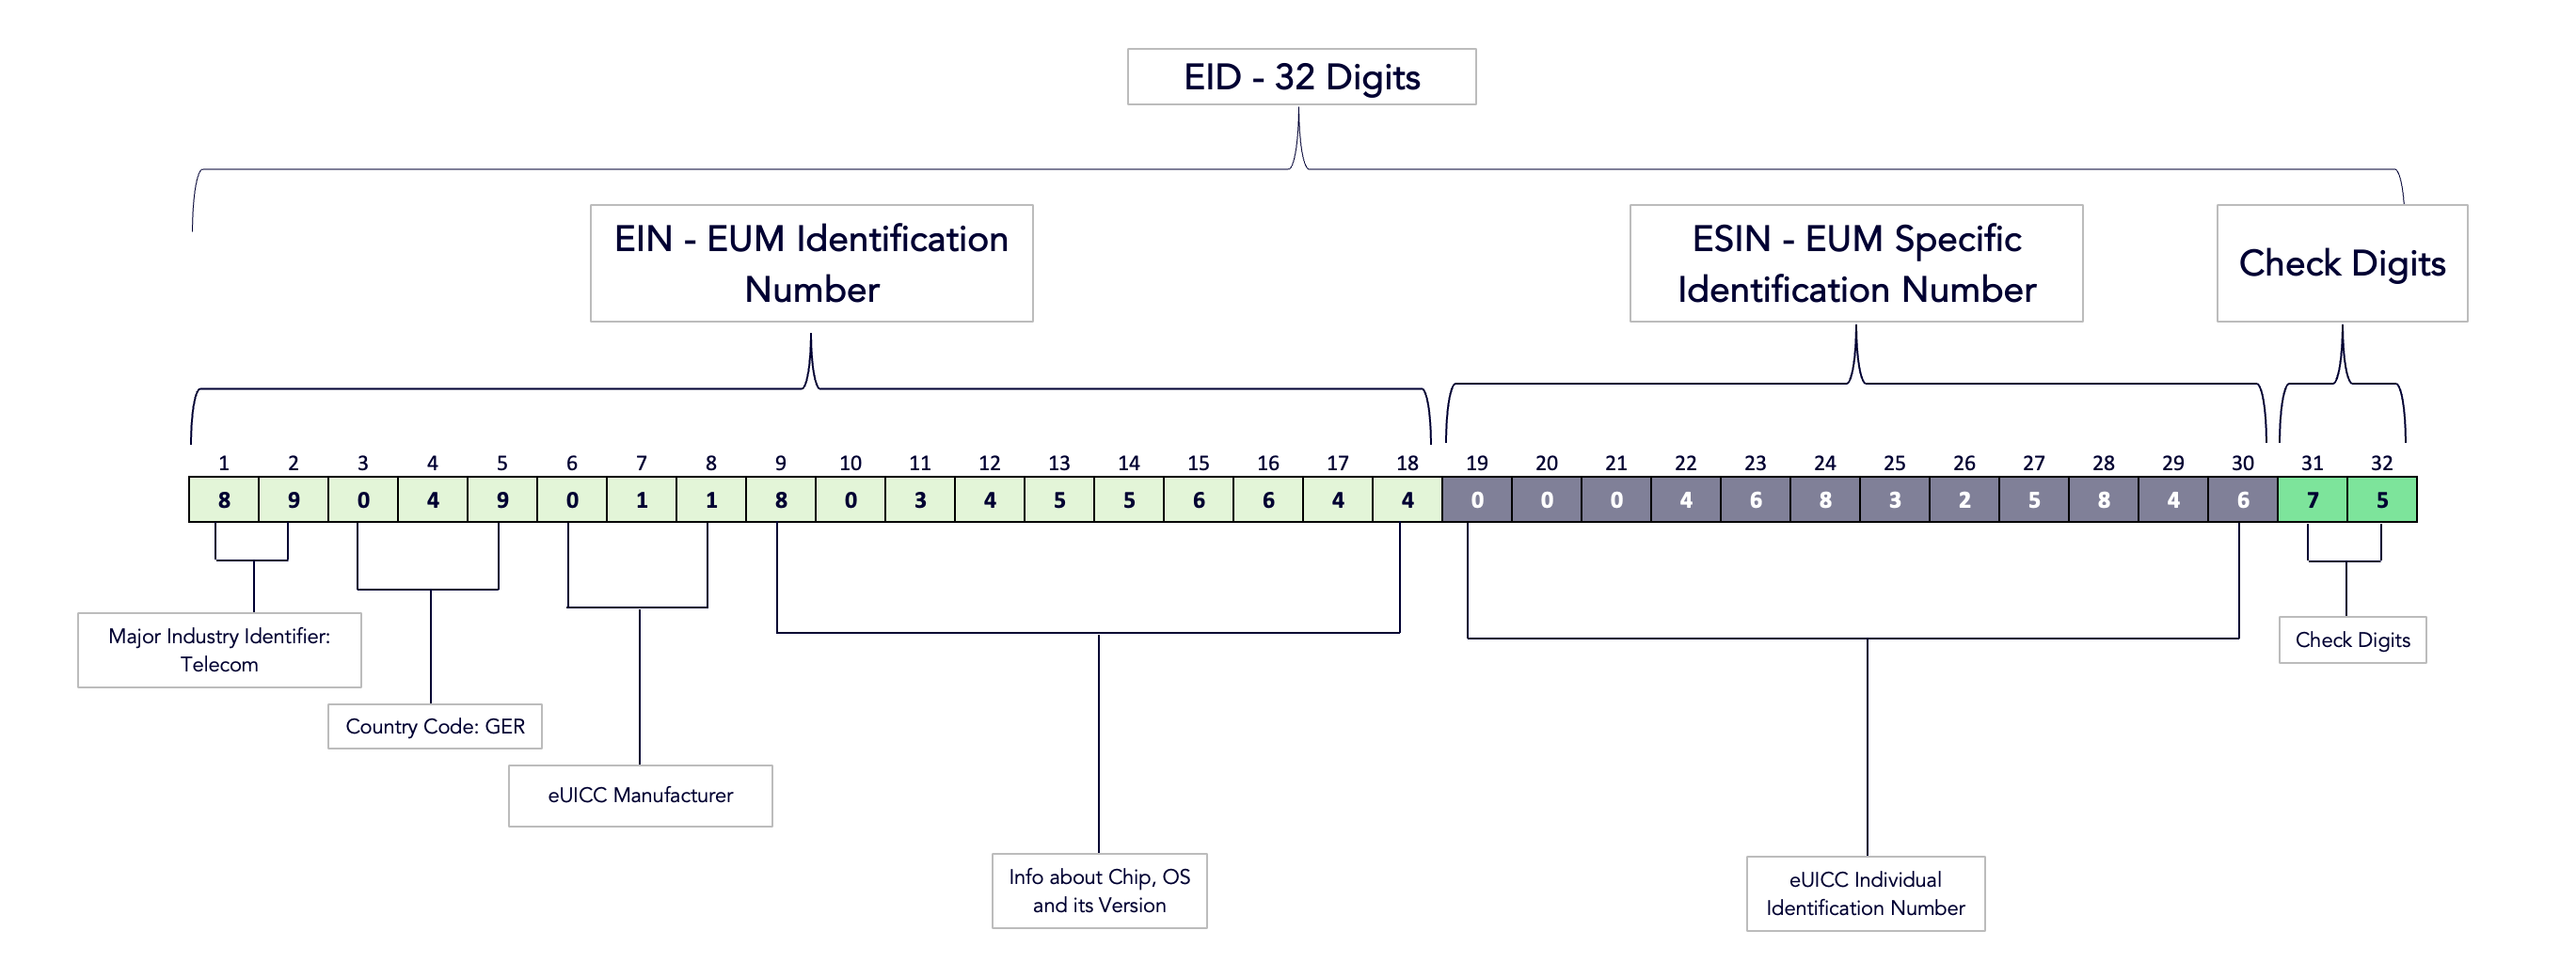 A 32-digit EID number: &quot;89049011803455664400046832584675&quot;. The first 18 digits are the EUM Identification Number (EIN). Within those 18 digits, the first two digits are the Major Industry Identifier (Telecom in this example). The next three digits are the Country Code (GER in this example). The next three digits are the eUICC Manufacturer. The final 10 digits of the EIN contain information about the chip, OS, and its version. After the EIN, the following 11 digits are the EUM Specific Identification Number (ESIN). This value is also the eUICC Individual Identification Number. The final two digits of the EID are the Check Digits.